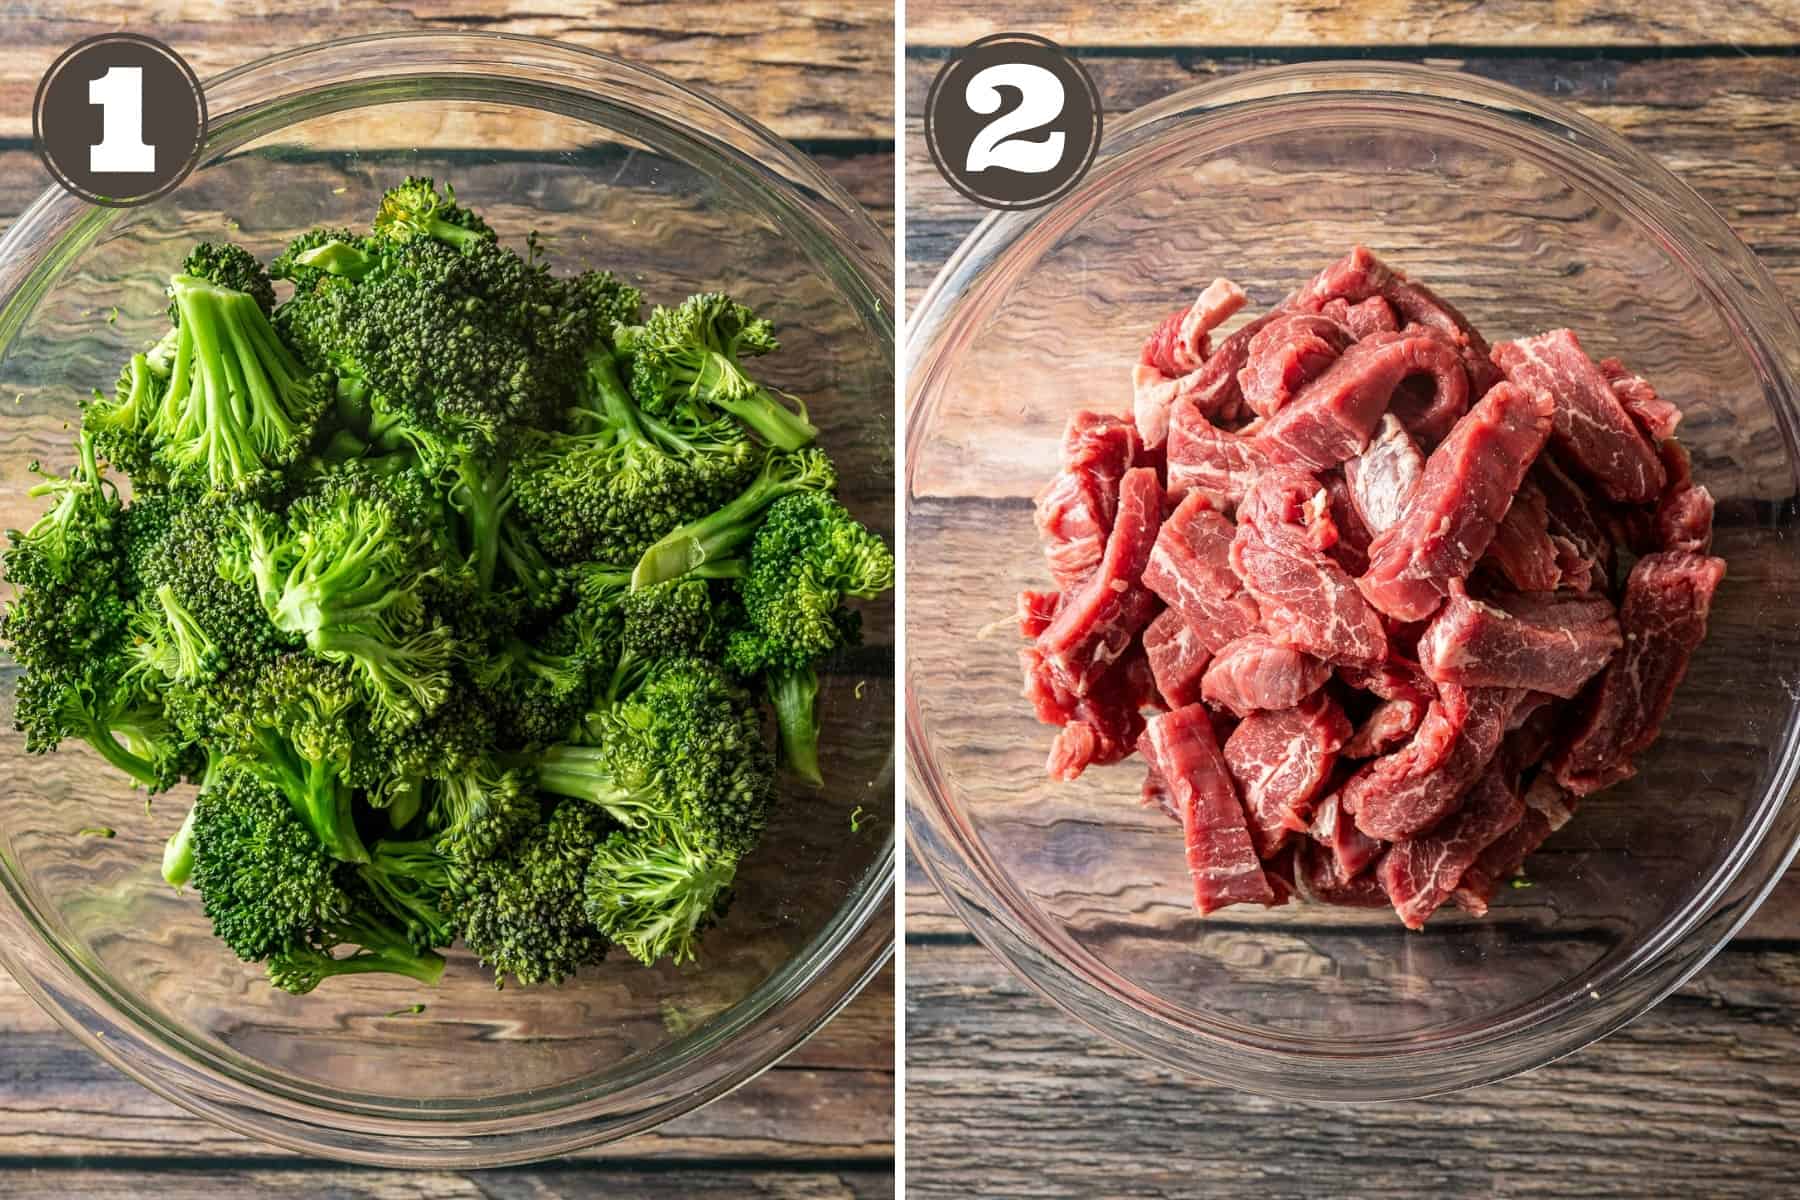 Side by side photos showing a glass bowl of broccoli and a glass bowl of sliced flank steak on a wood background.